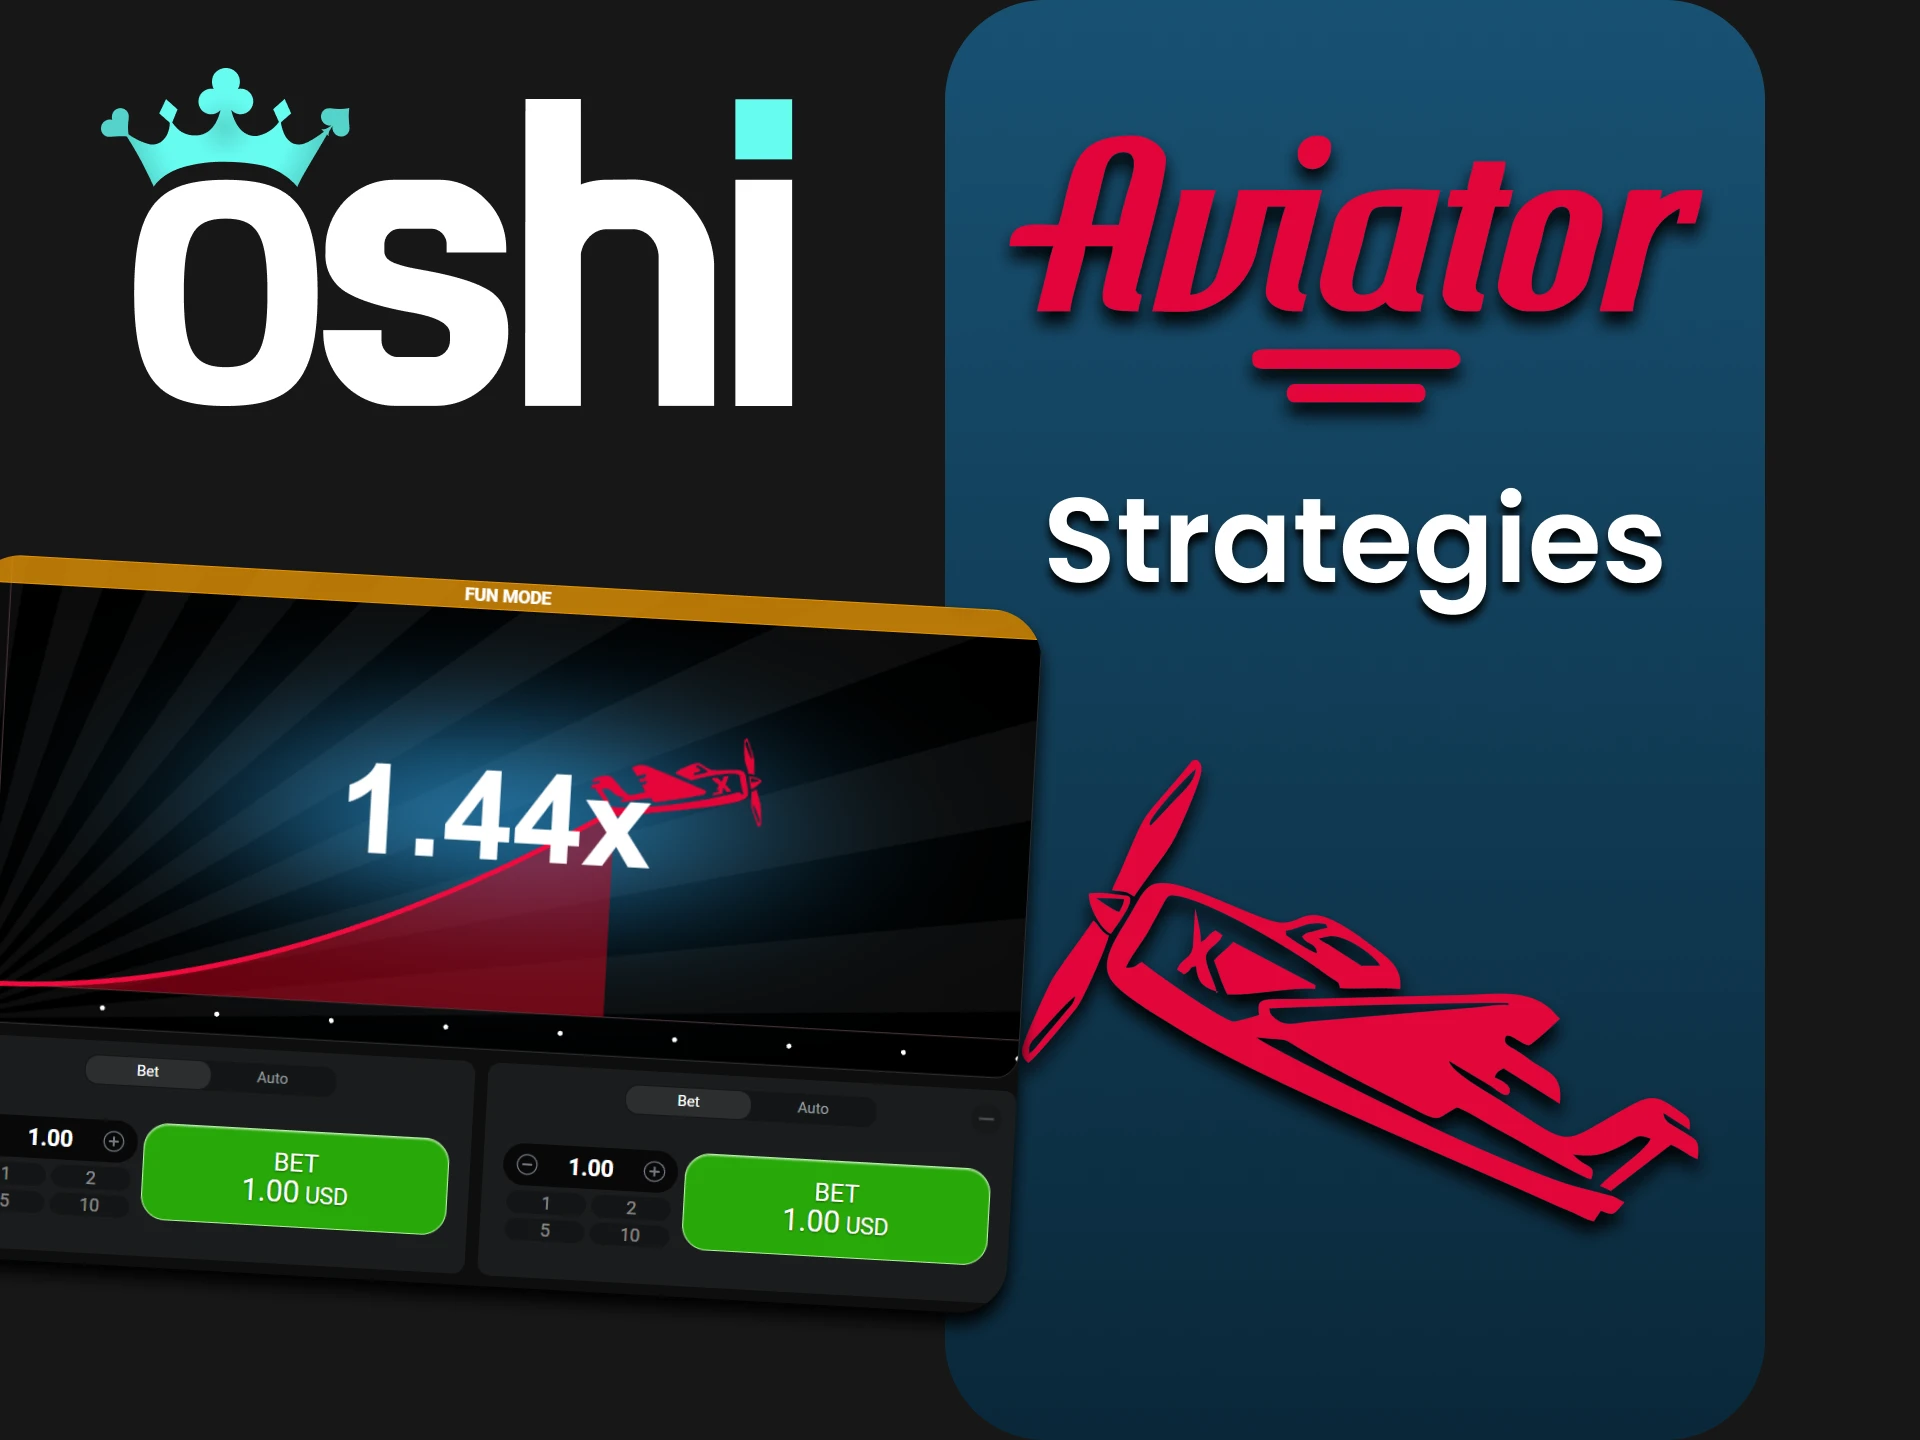 Choose the right strategy to play Aviator at Oshi Casino.